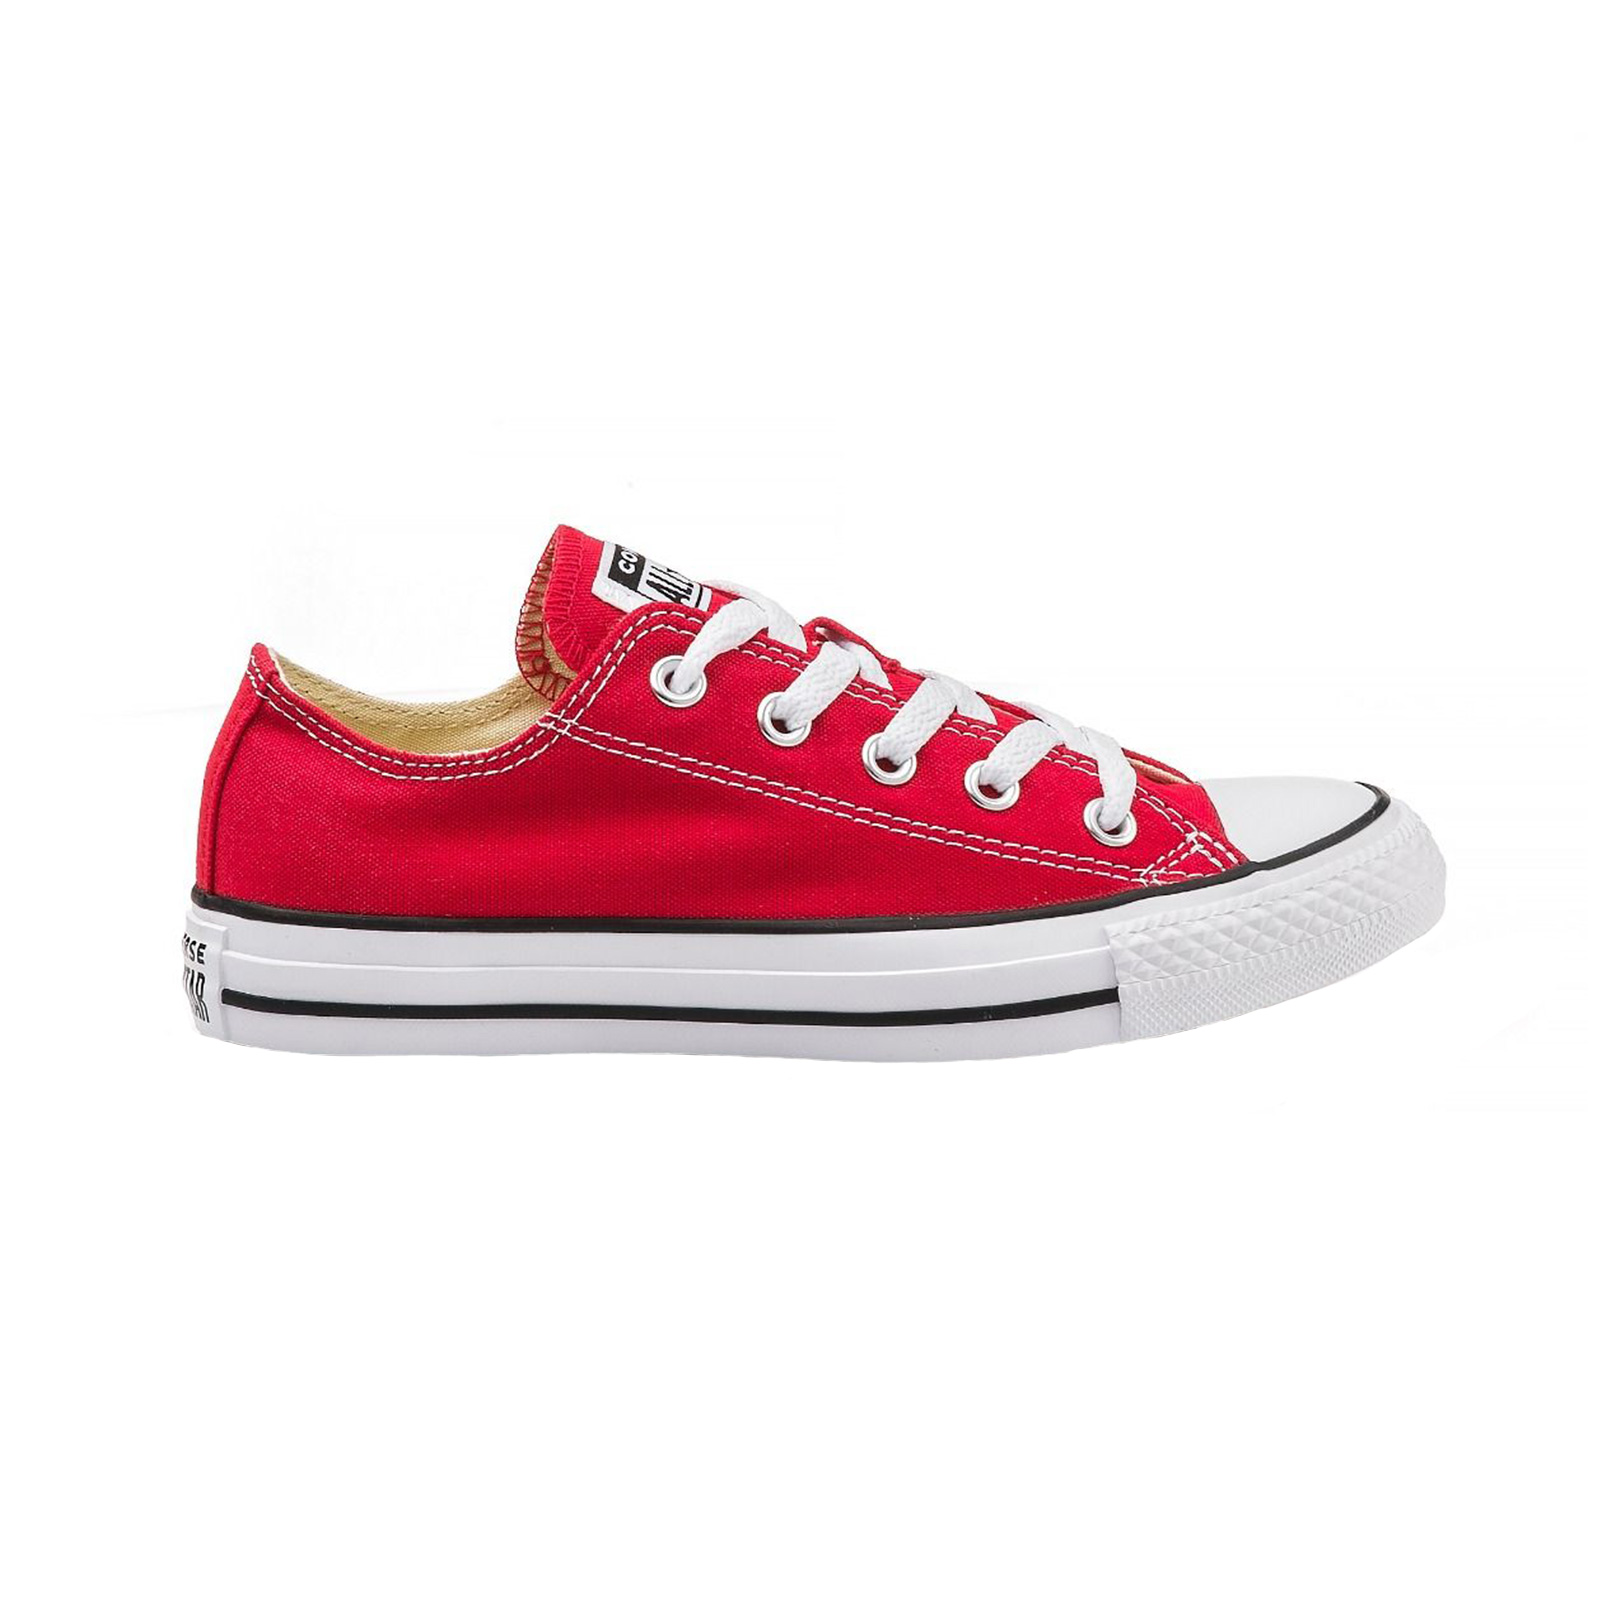 Converse - CHUCK TAYLOR ALL STAR - 600-RED Παιδικά > Παπούτσια > Sneaker > Παπούτσι Mid Cut